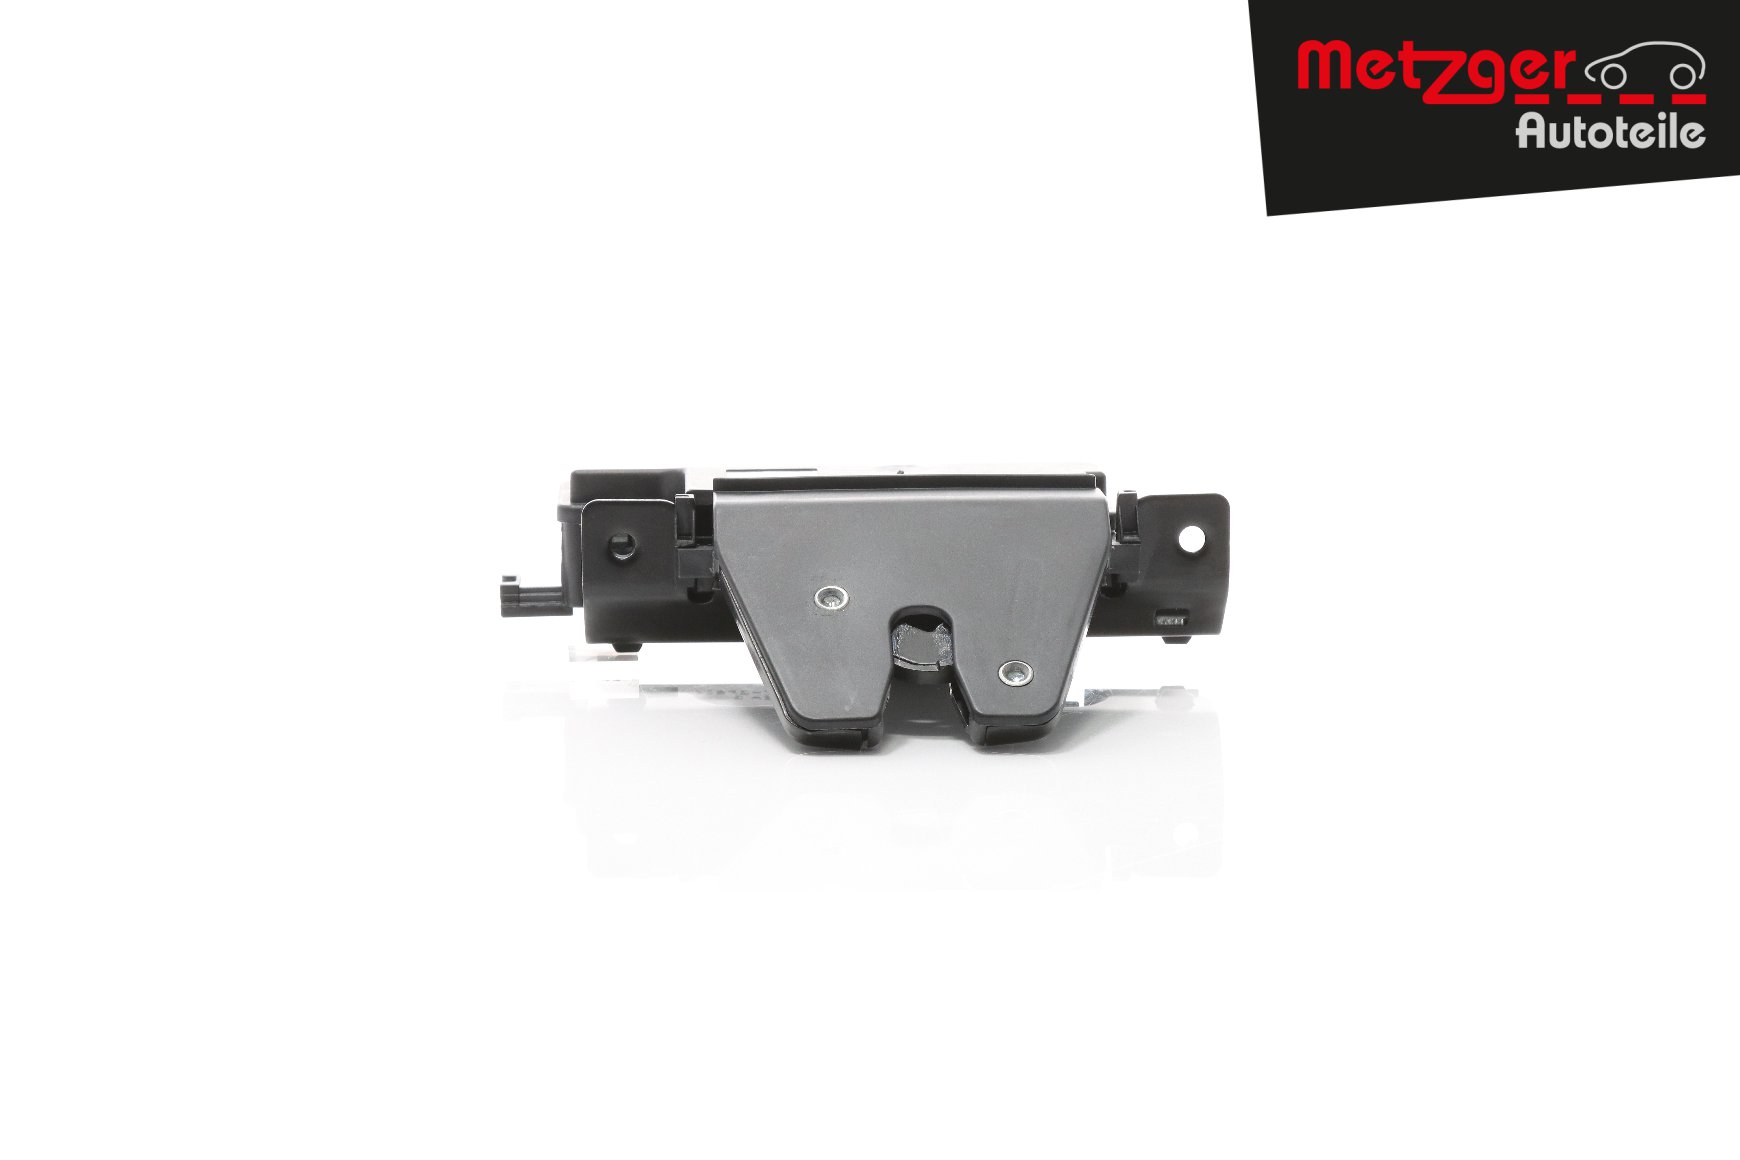 METZGER 2310654 Tailgate Lock BMW experience and price